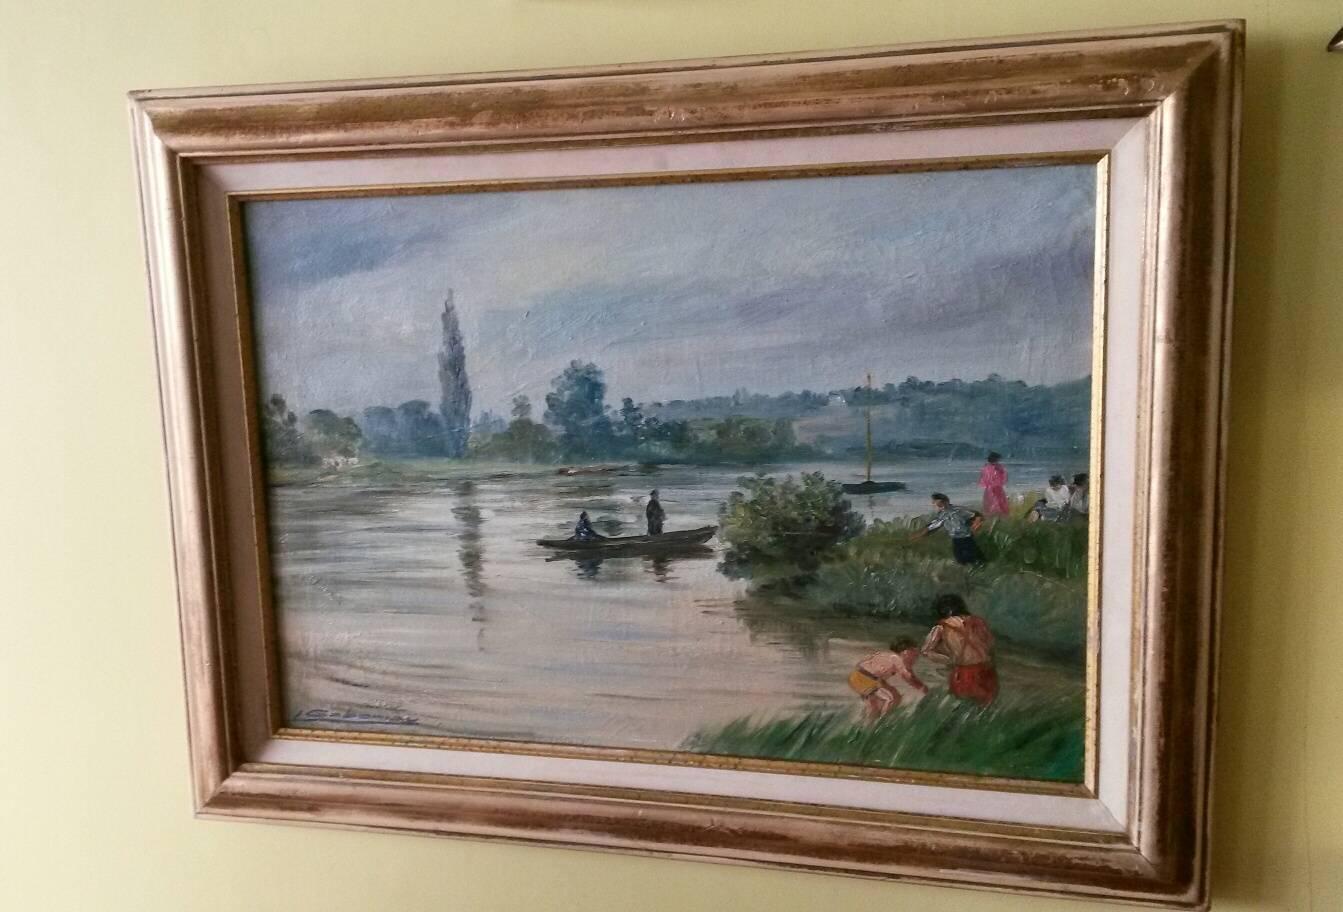 Charming French  1930's Post Impressionist landscape Oil on canvas painting in a Post Impressionist style signed  by Gaboriau representing a life scene by the Seine River banks ( written on the back : Seine et  Marne area)
In a excellent  general